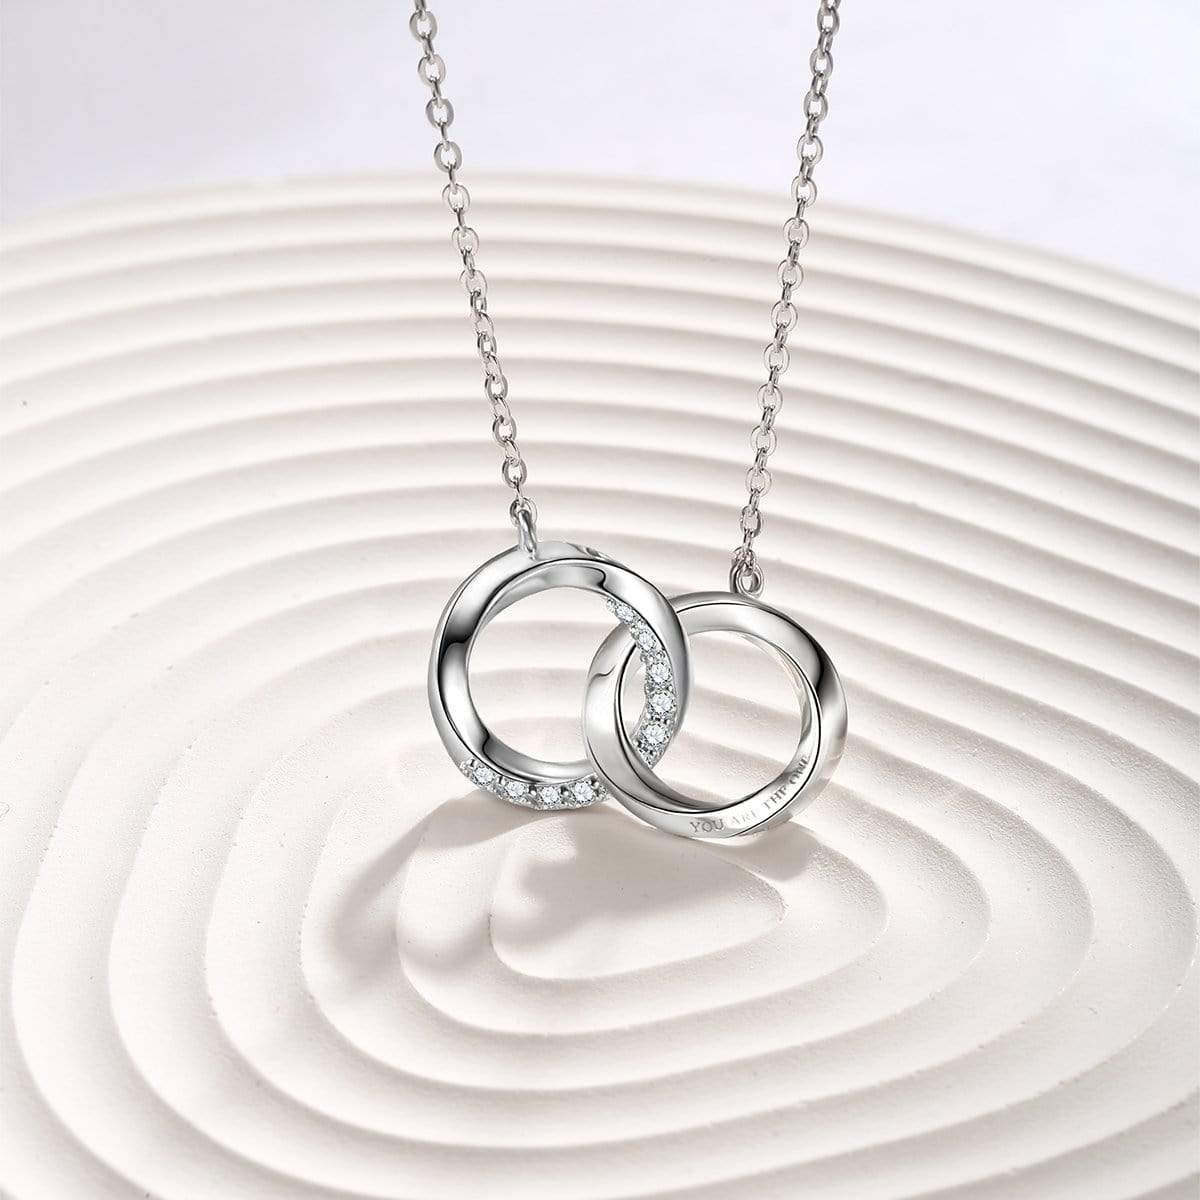 Fanci "Connected" Mobius Matching Ring Sterling Silver Necklace Main